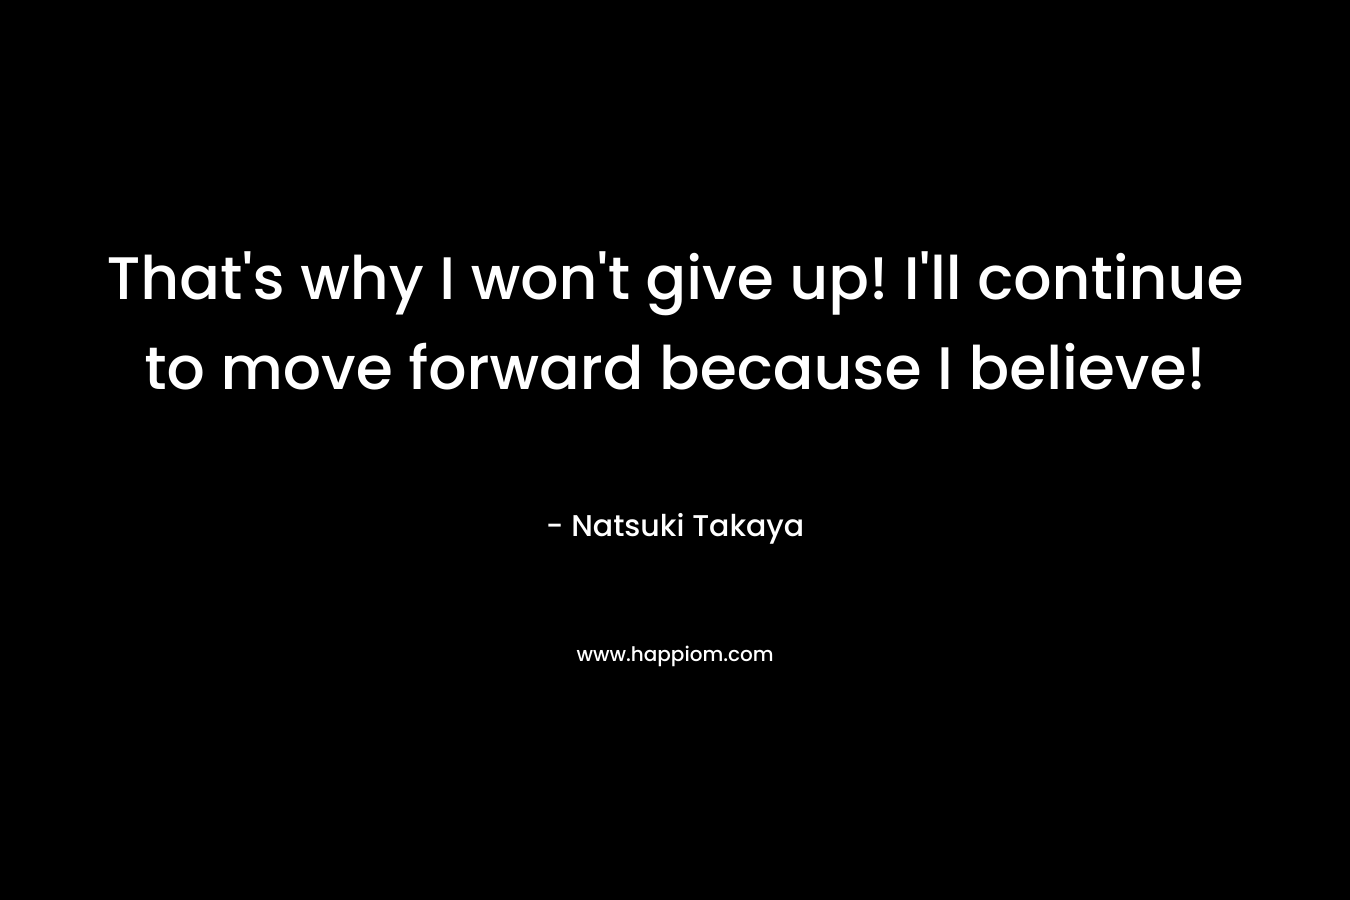 That's why I won't give up! I'll continue to move forward because I believe!